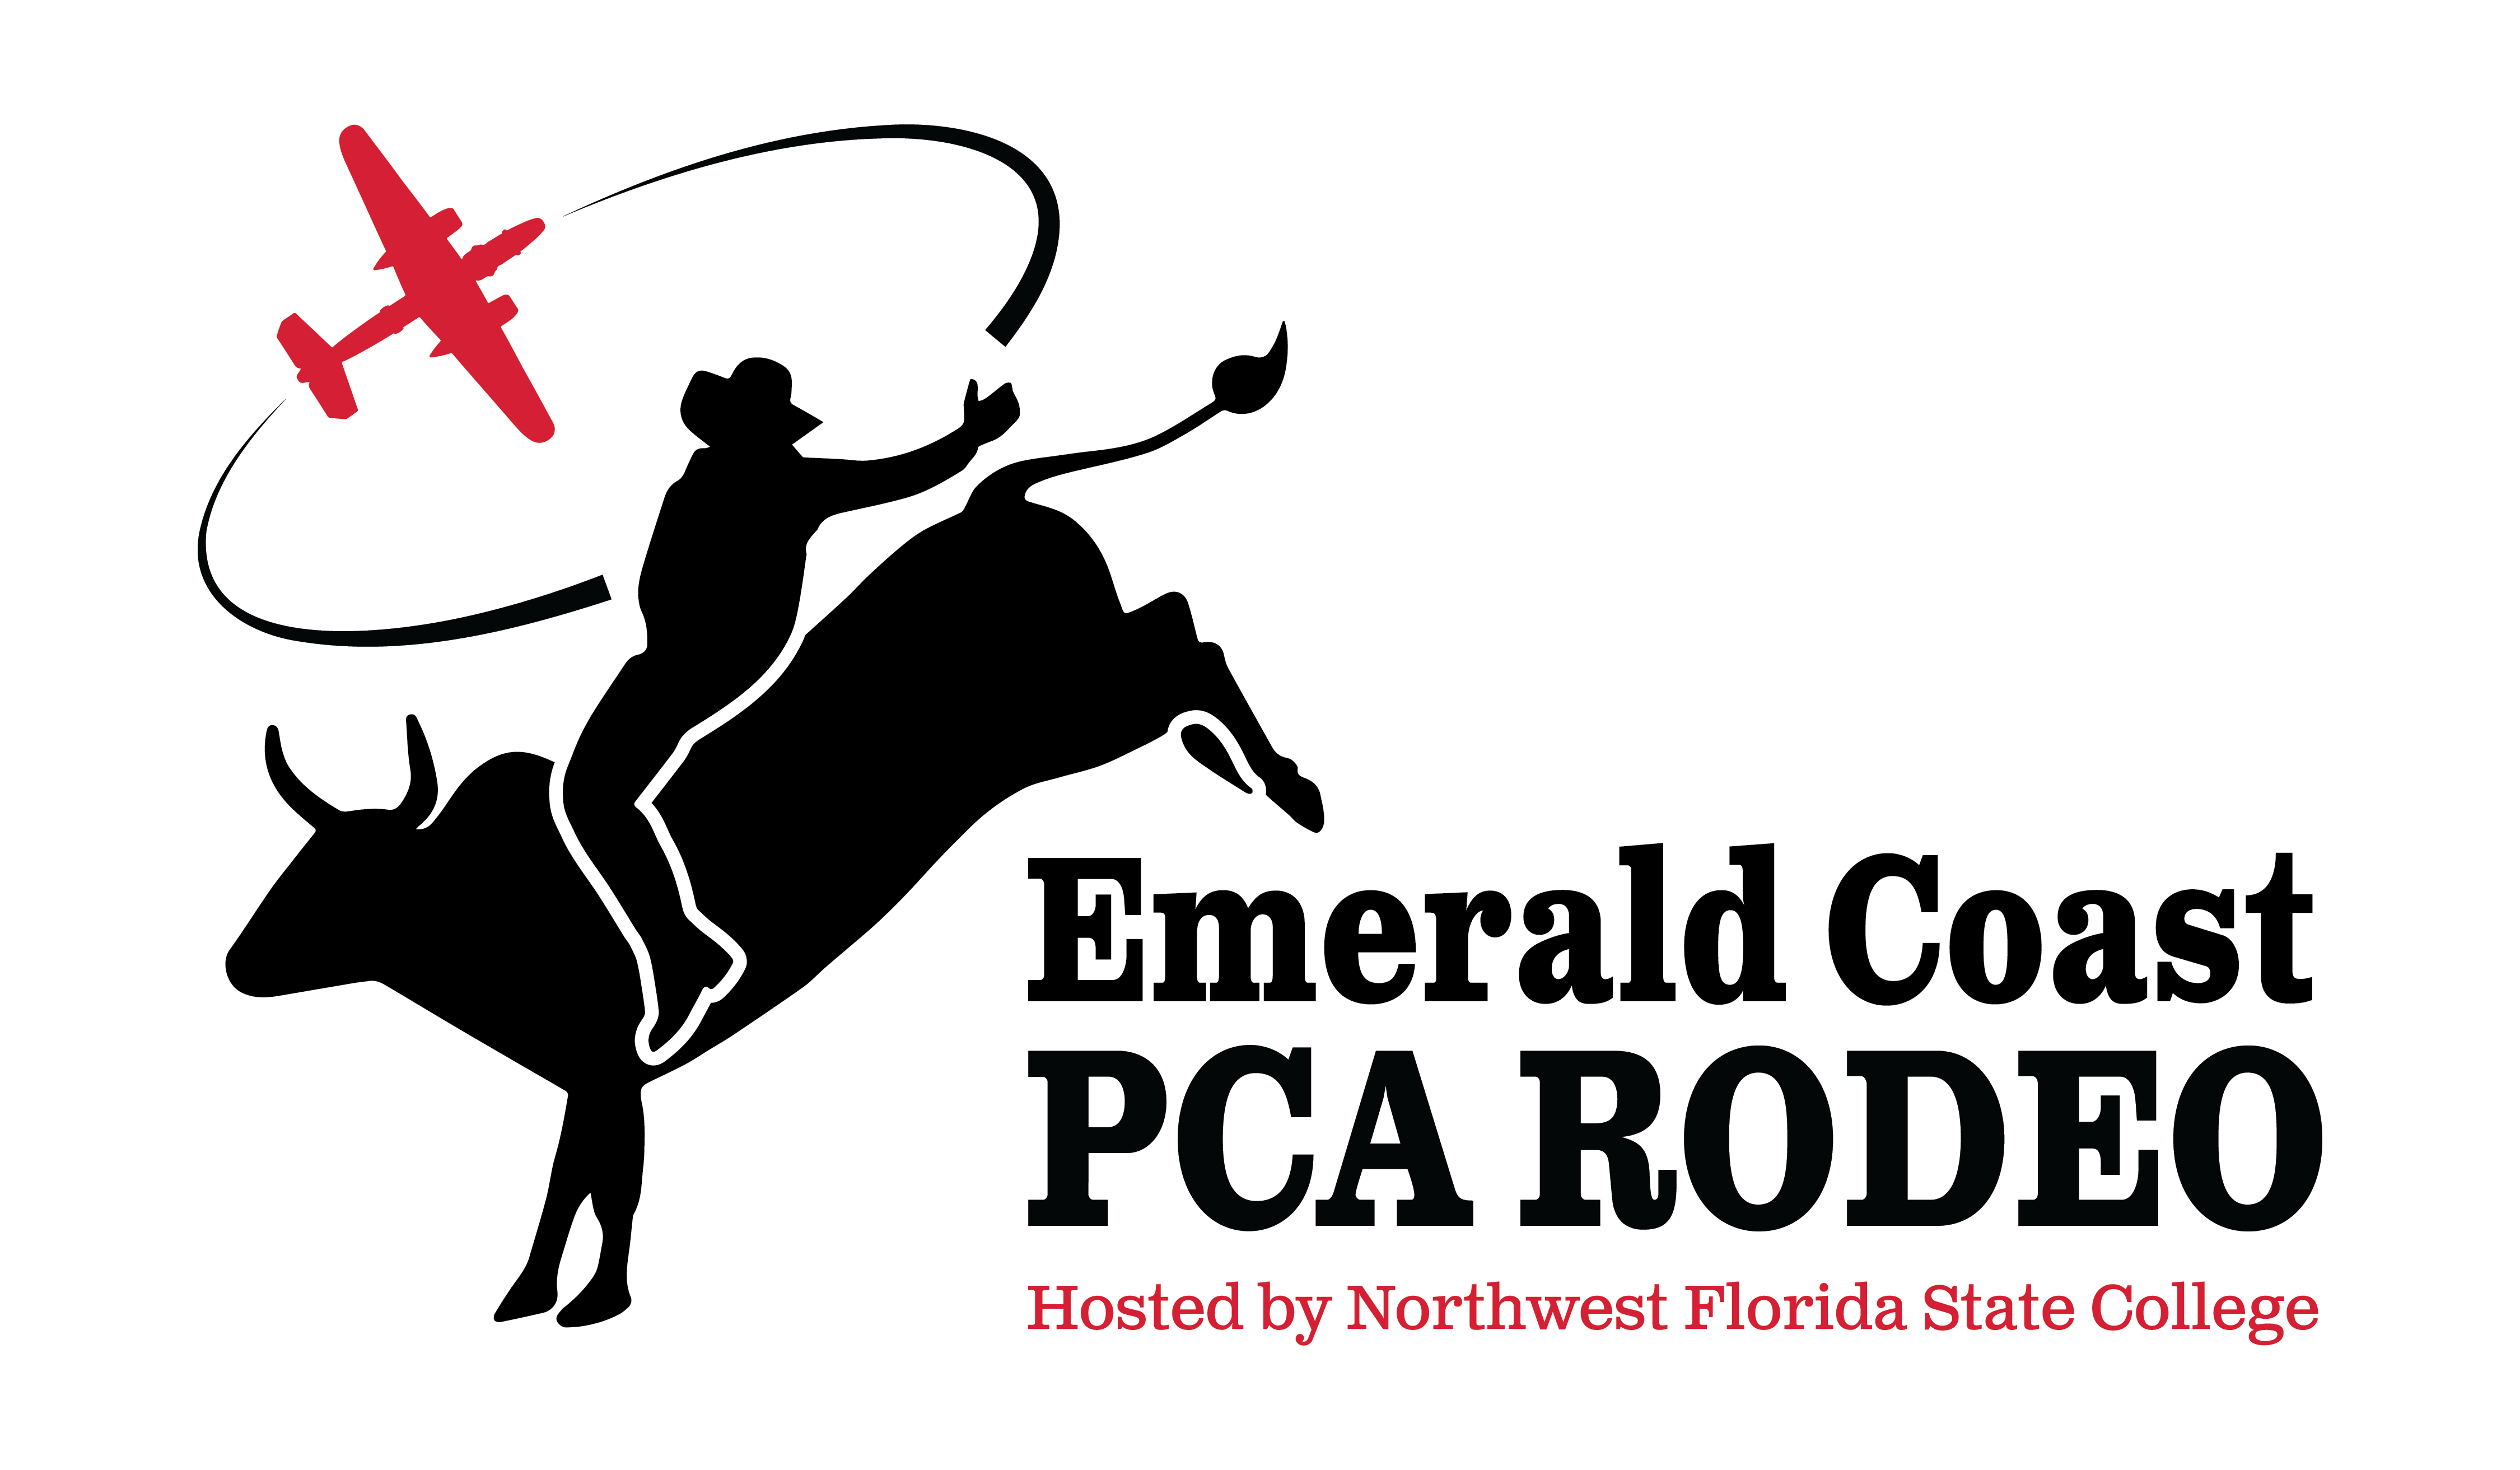 Emerald Coast PCA Rodeo comes to Niceville in November to support